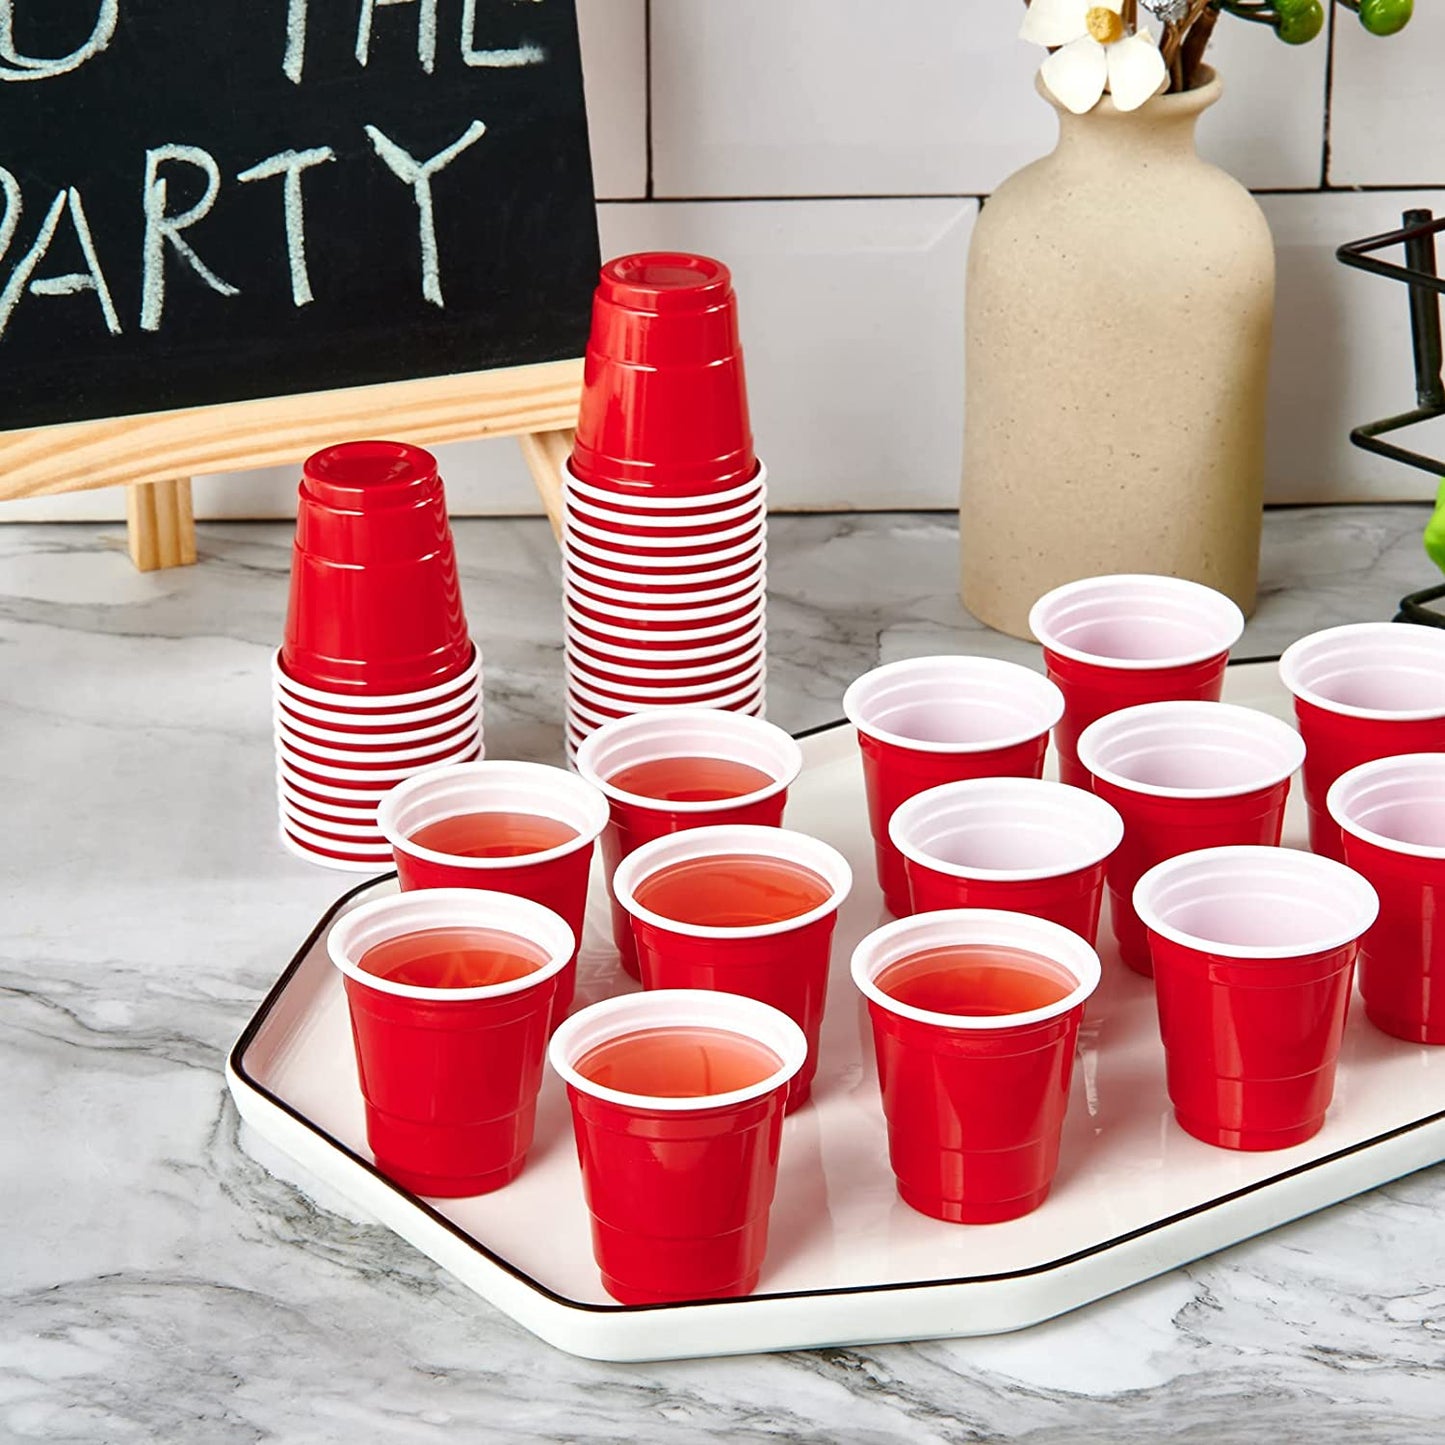 1080 PACK 2 Oz Plastic Shot Glasses, Red Disposable Shot Cups, Mini Red Shot Glasses for Halloween Thanksgiving Christmas Party